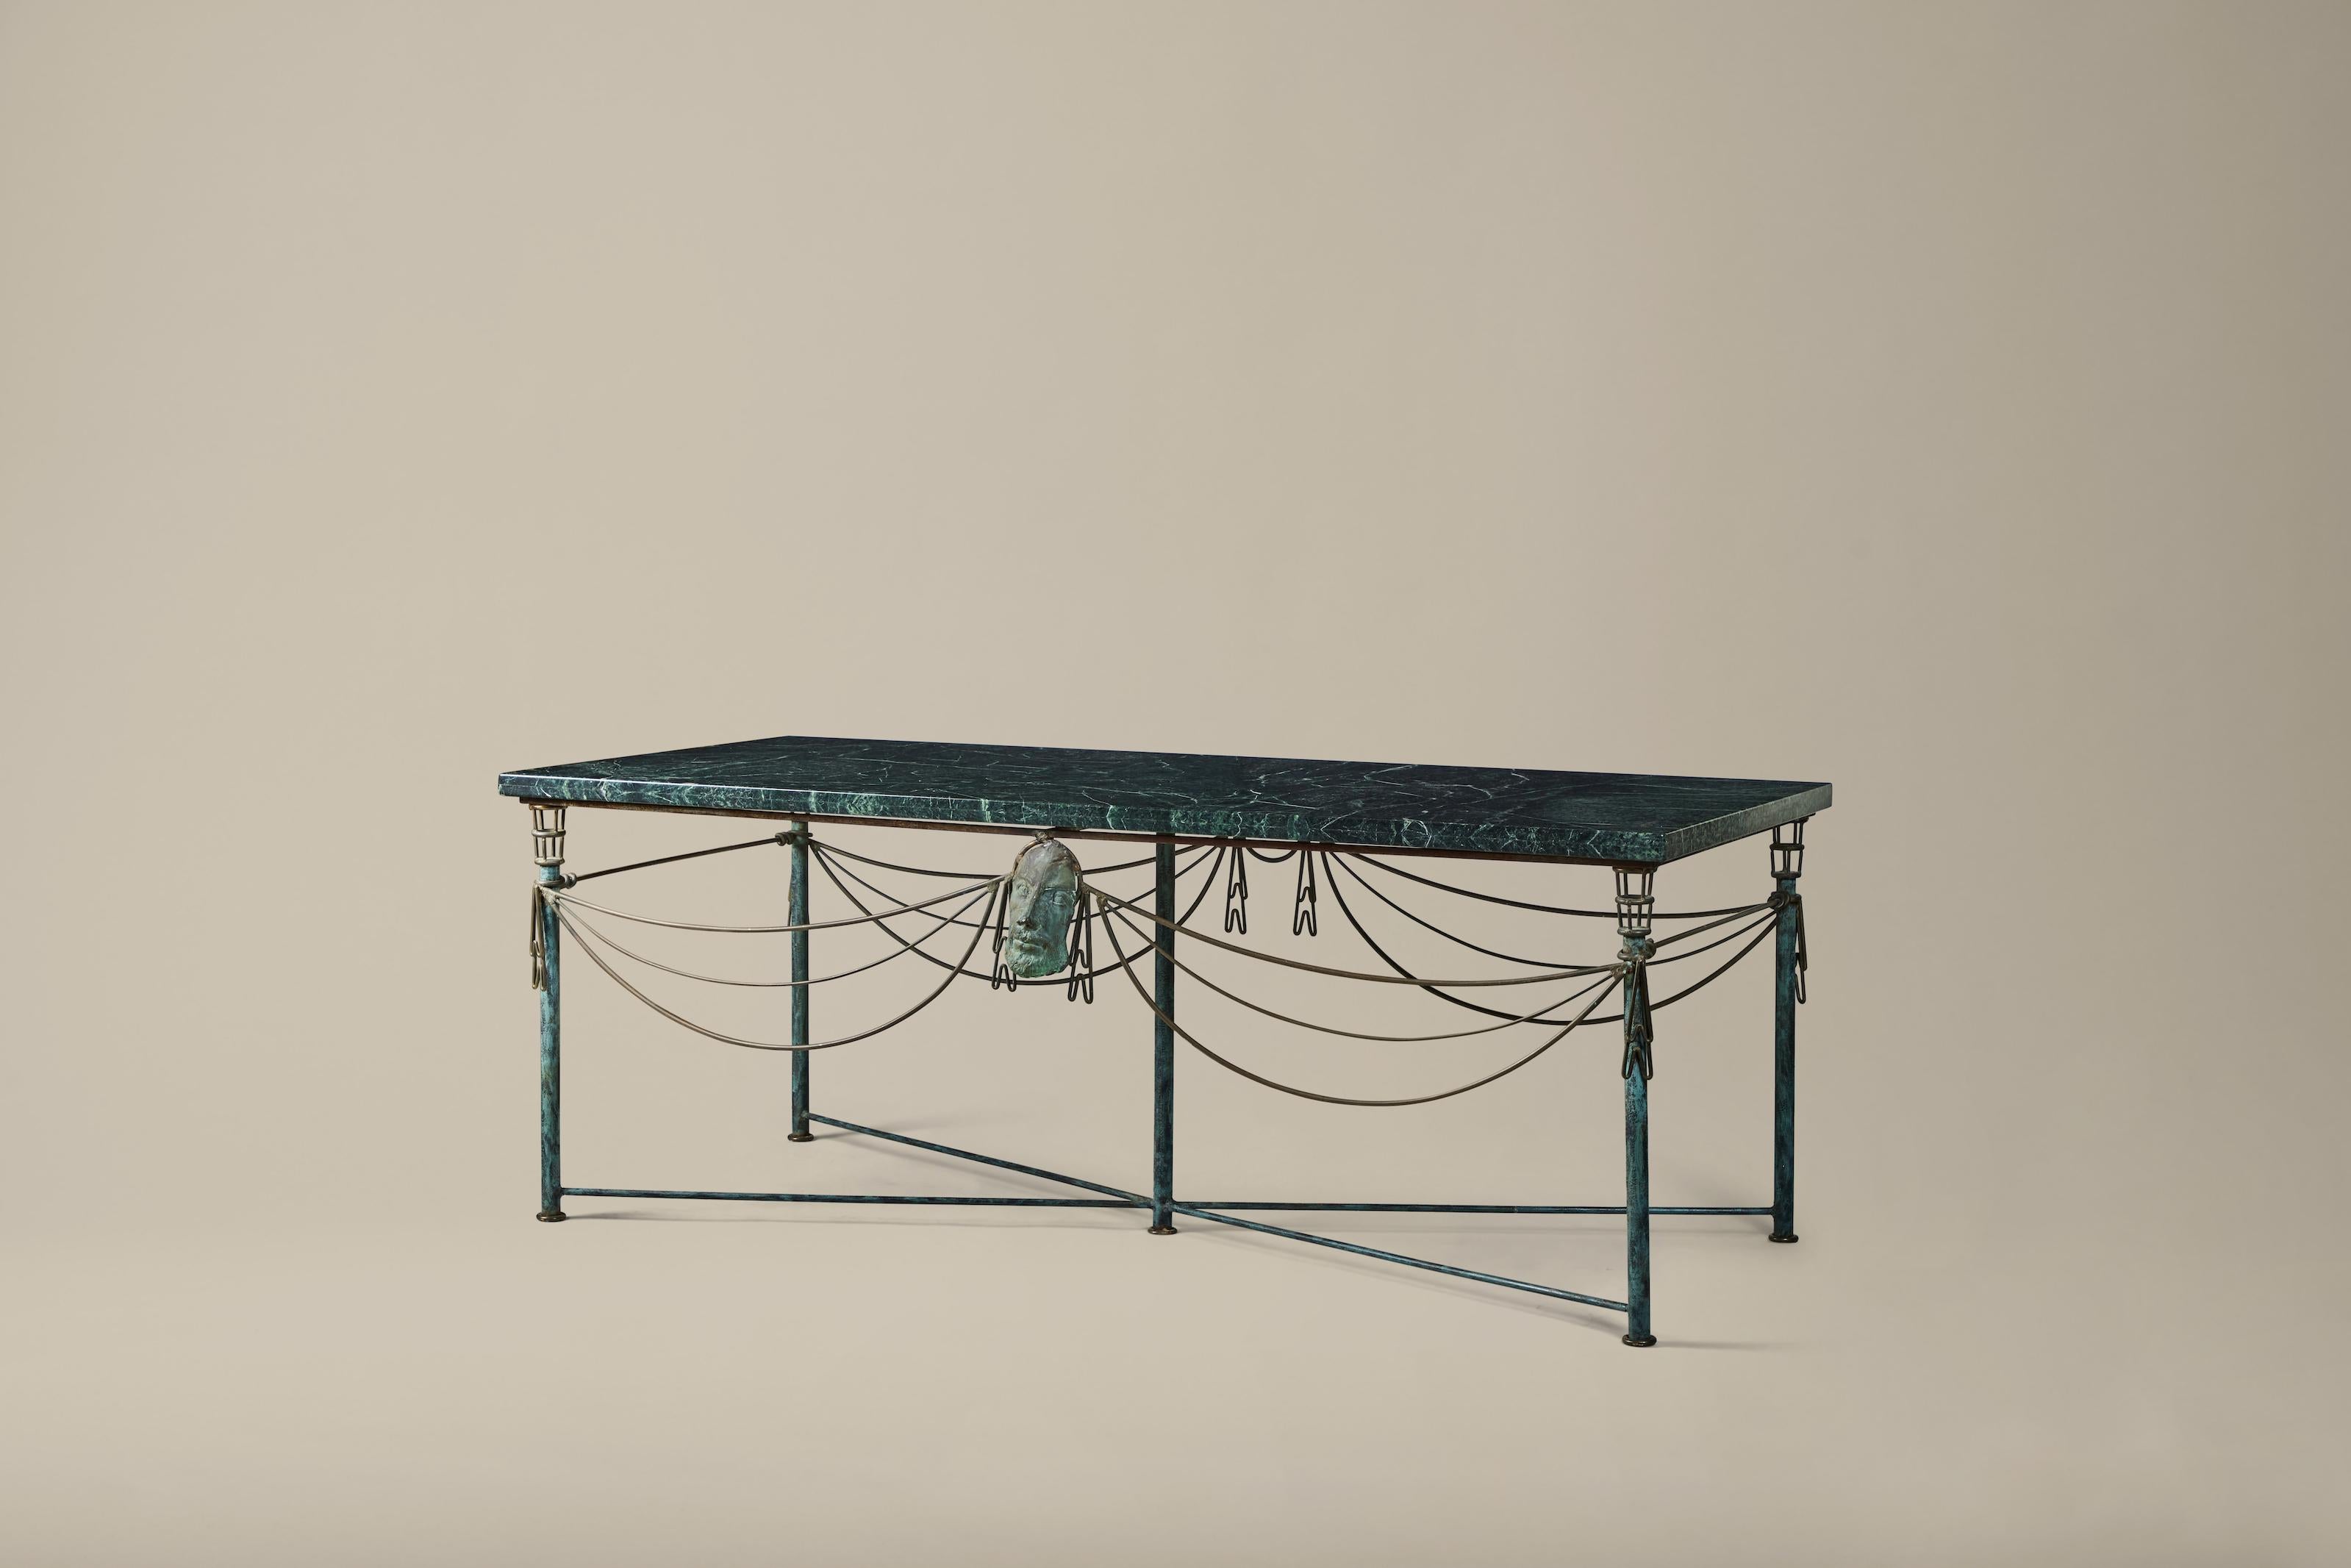 This patinated metal and marble table was designed by Nicaraguan artist Mario Villa (1953-2021). The exaggerated swag and Grecco-Roman mask apron are characteristic of Villa's work. The table features a verdigris marble top, cylindrical legs,